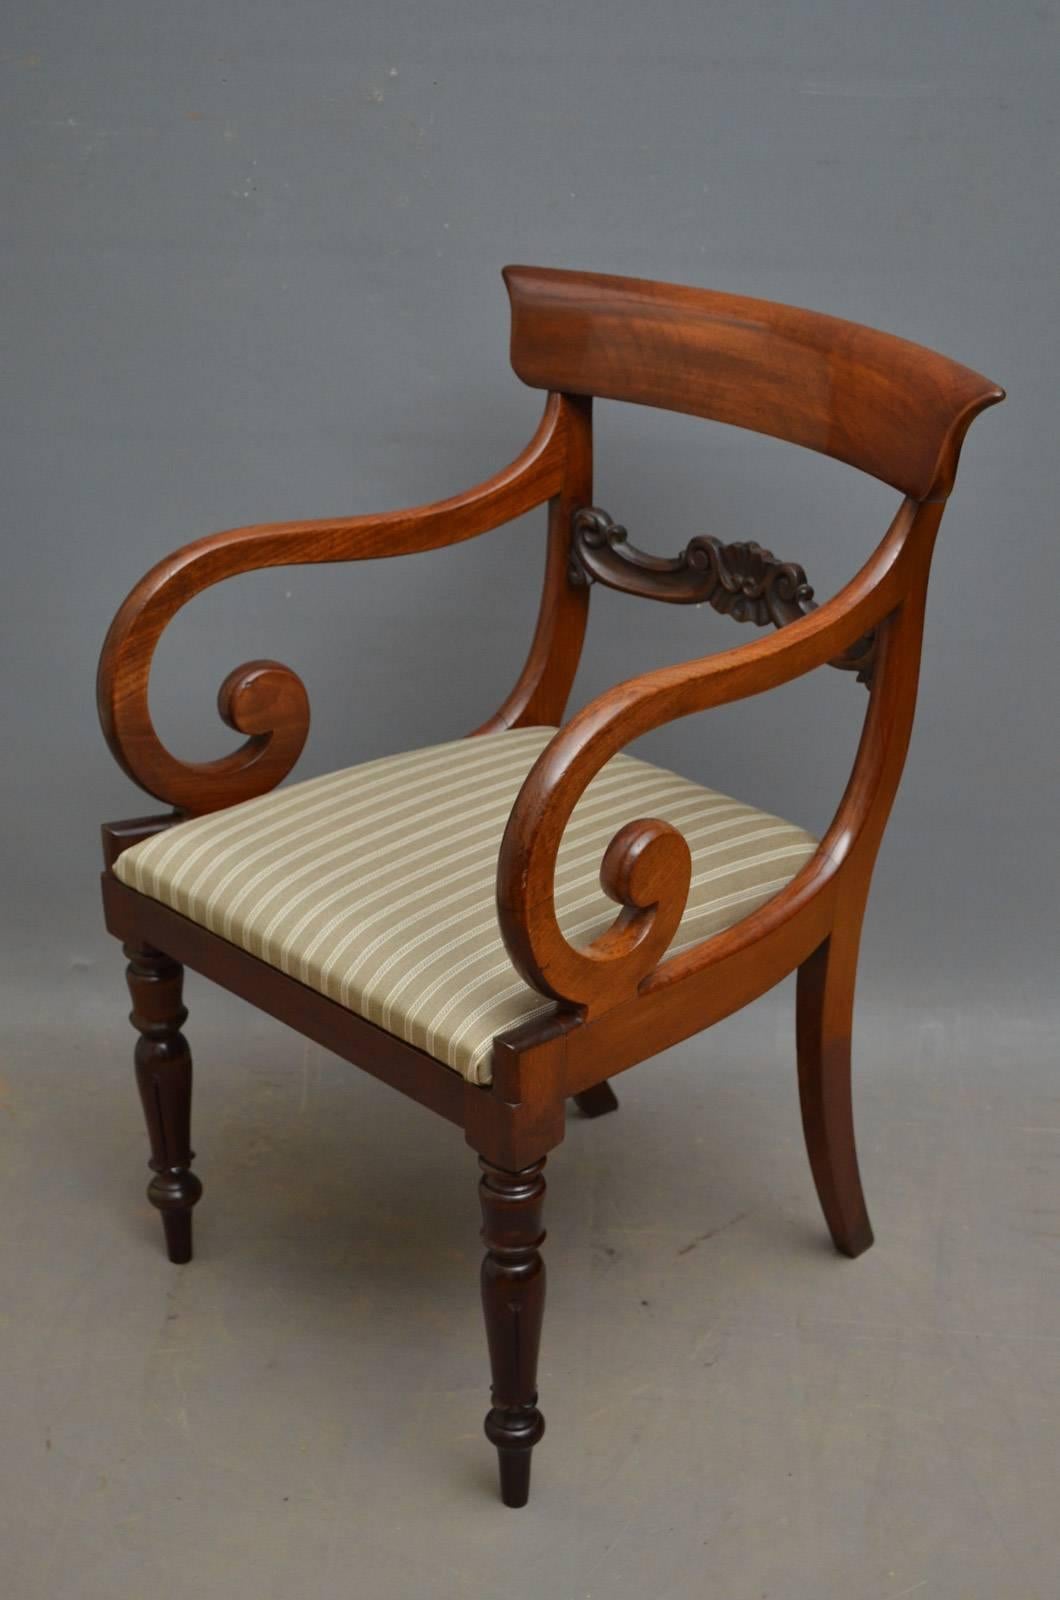 K0320, a pair of William IV mahogany armchairs, each having fantastic figured mahogany top rail with carved mid rail, open scroll arms and upholstered drop in seat, all standing on elegant tulip carved legs. This pair of antique carver chairs is in